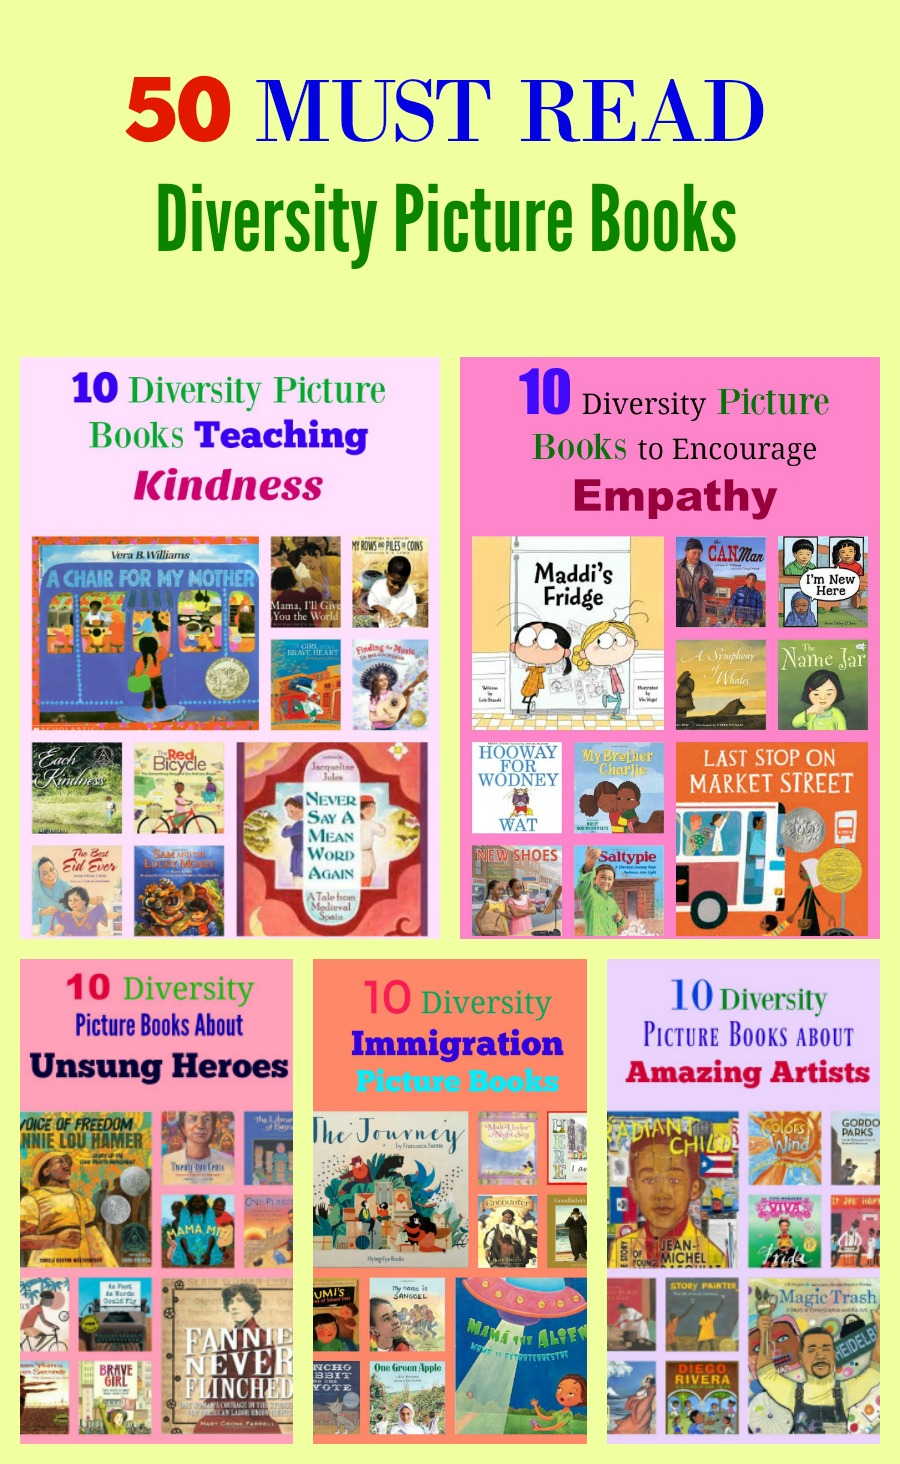 50 MUST READ Diversity Picture Books